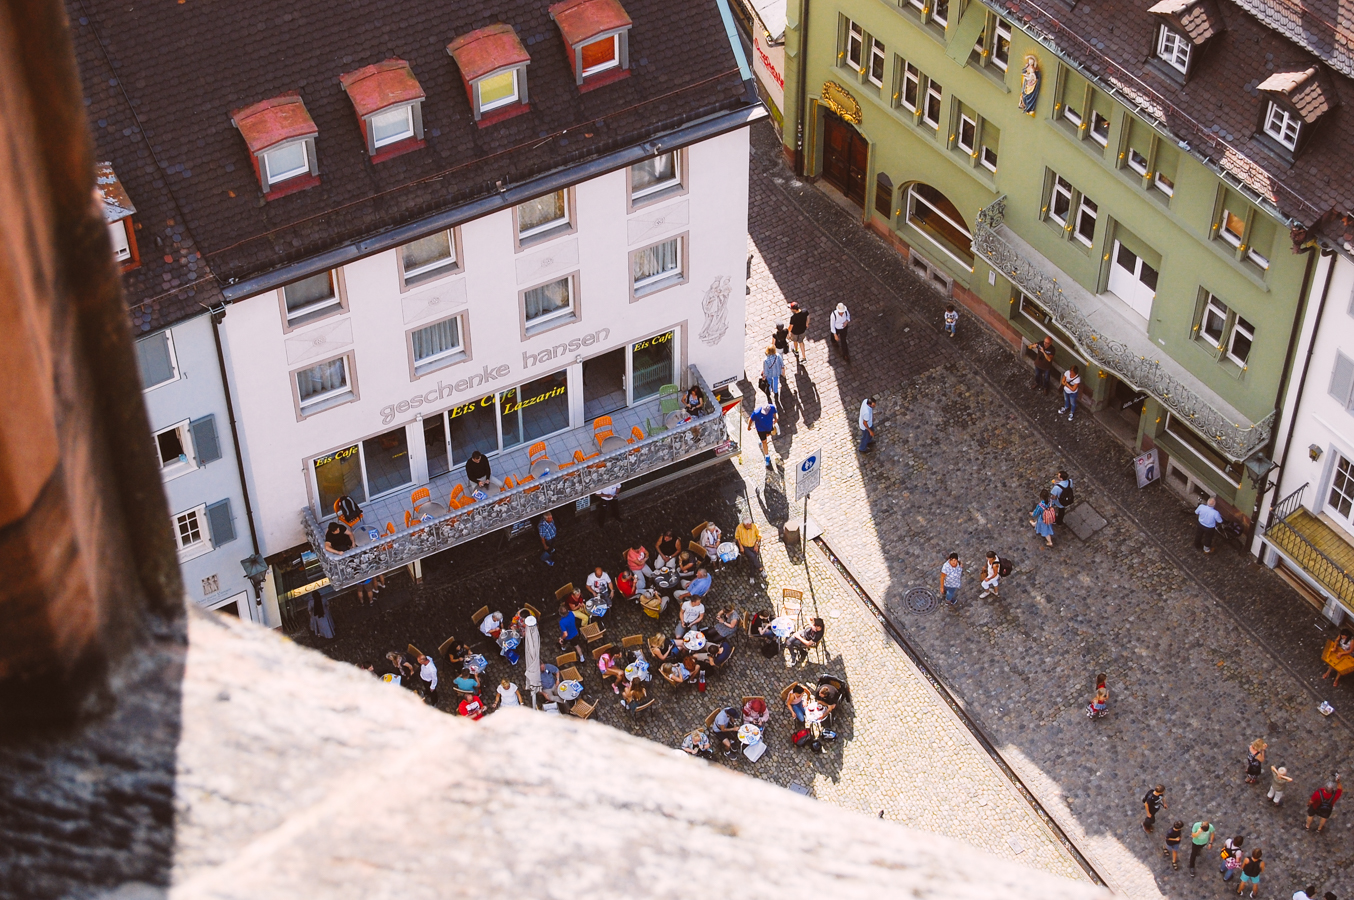 Looking down onto the main square of Freiburg